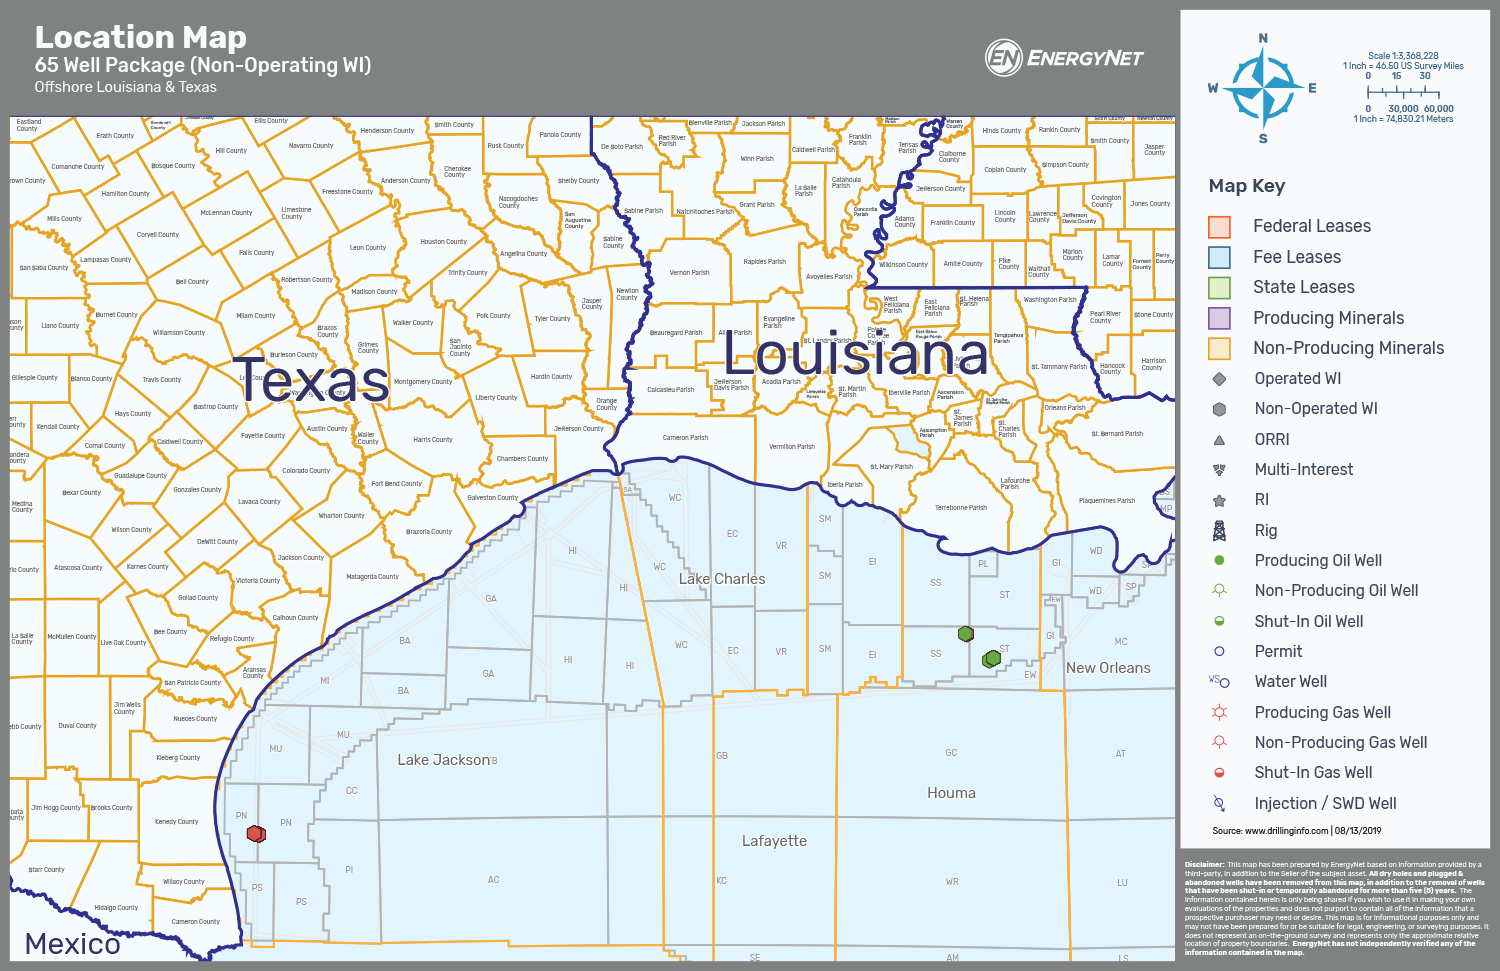 Apache US Gulf Of Mexico Nonop Package Offshore Louisiana, Texas Asset Map (Source: EnergyNet)